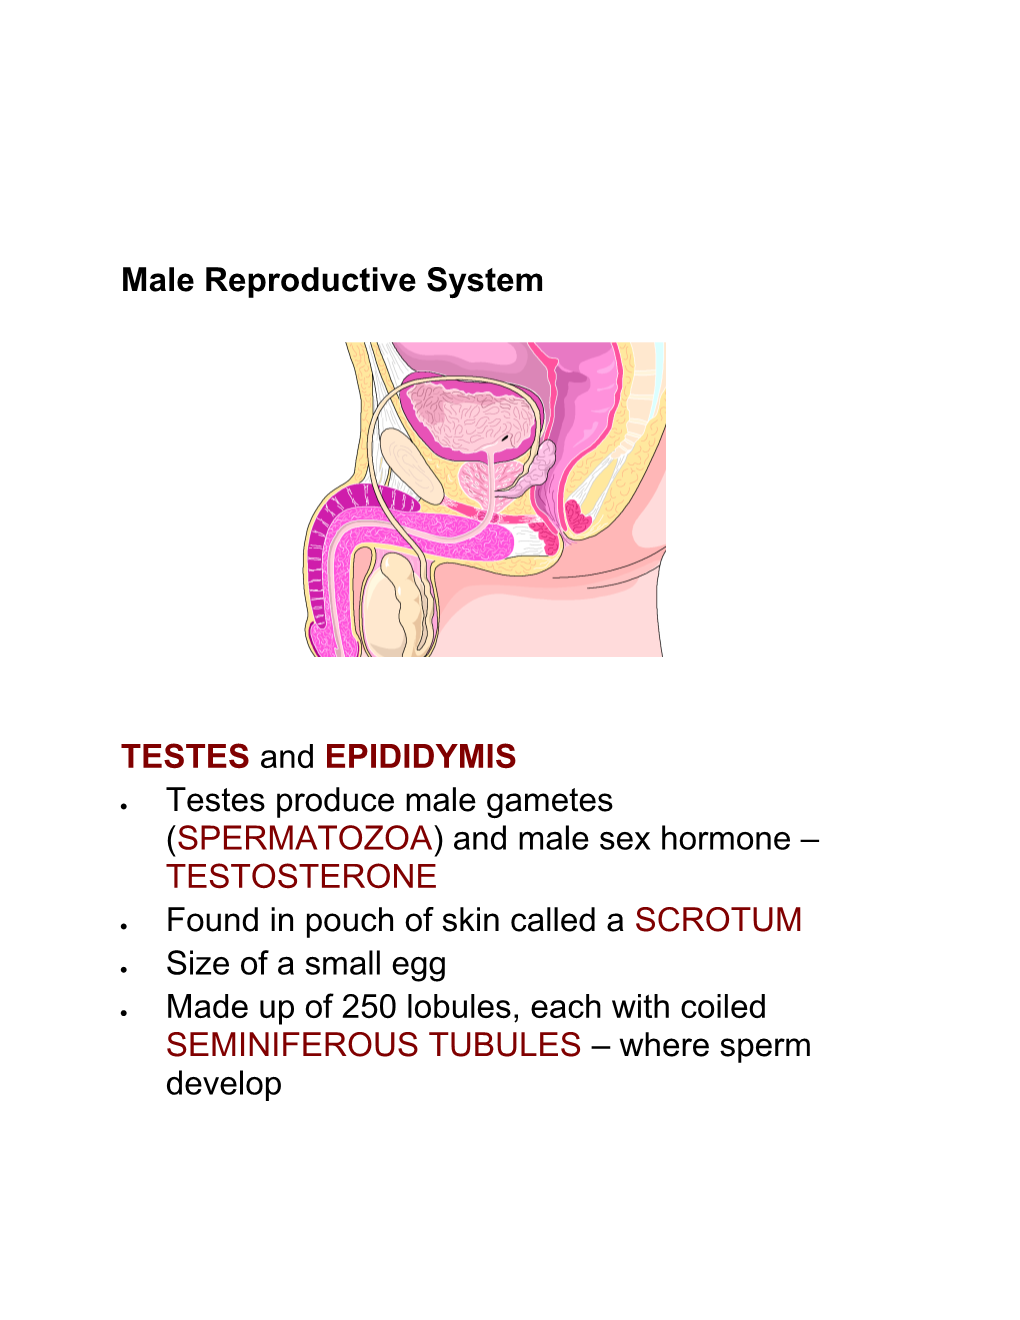 Male Reproductive System s1